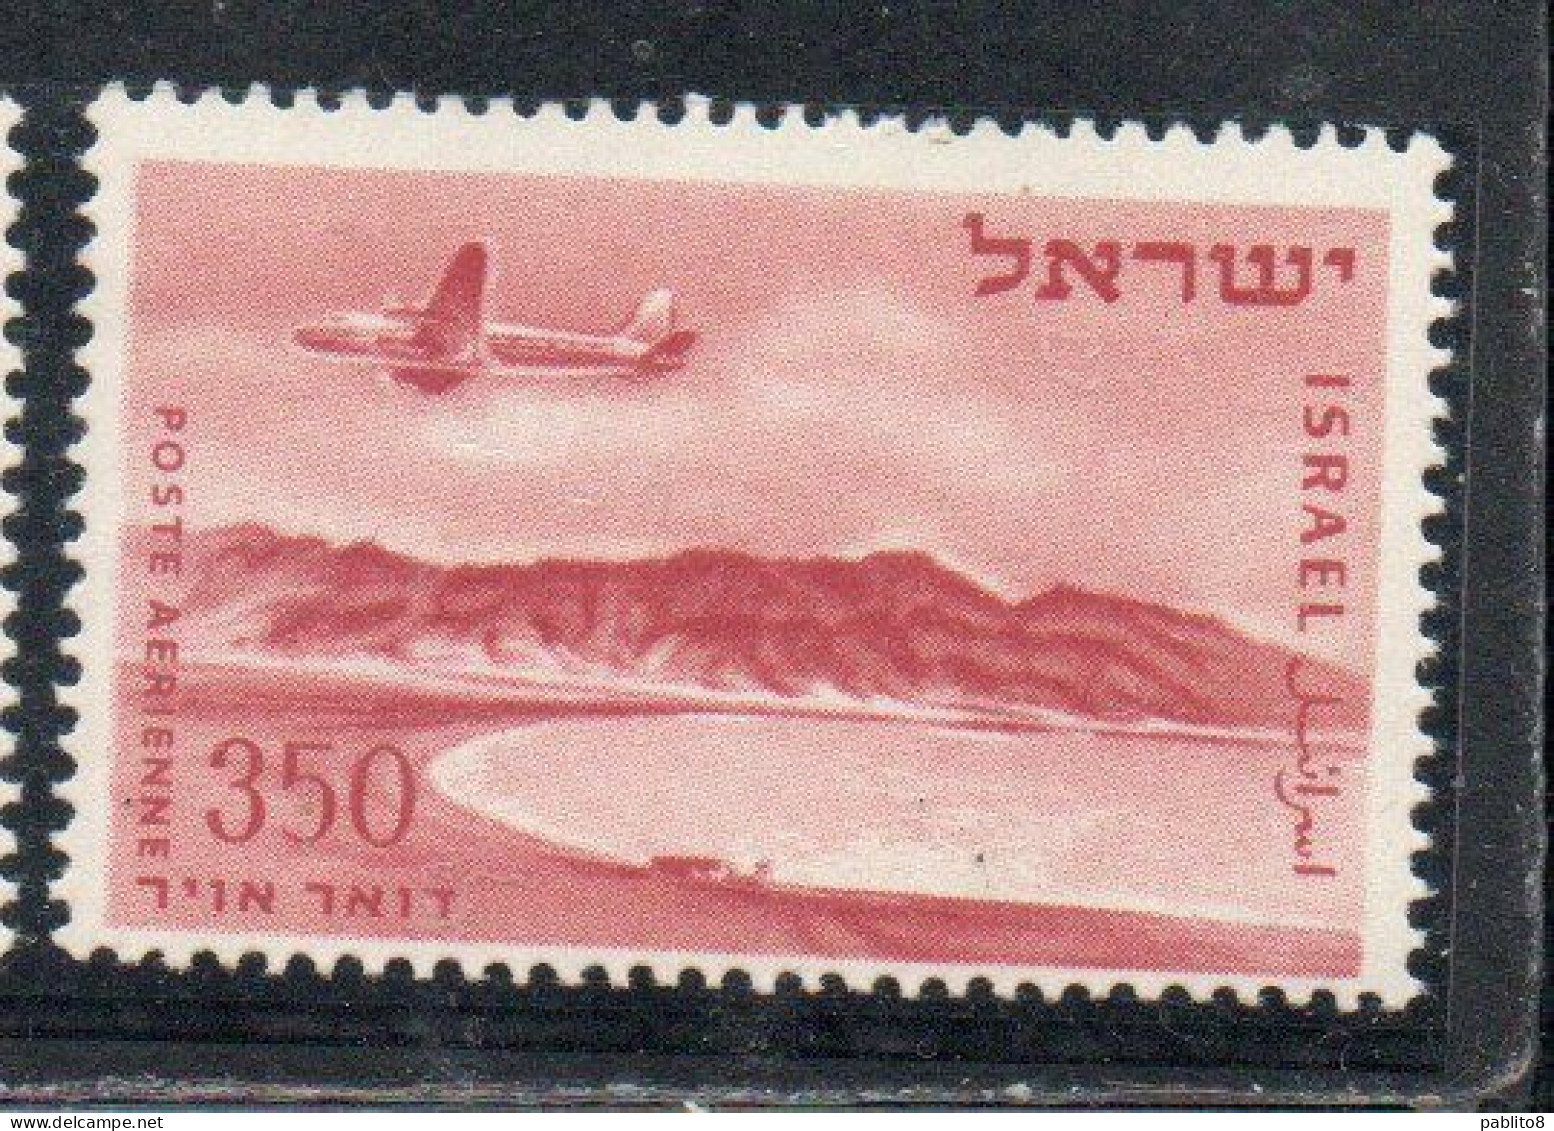 ISRAEL ISRAELE 1953 1956 AIRMAIL AIR POST MAIL BAY OF ELAT RED SEA 350p MNH - Luchtpost